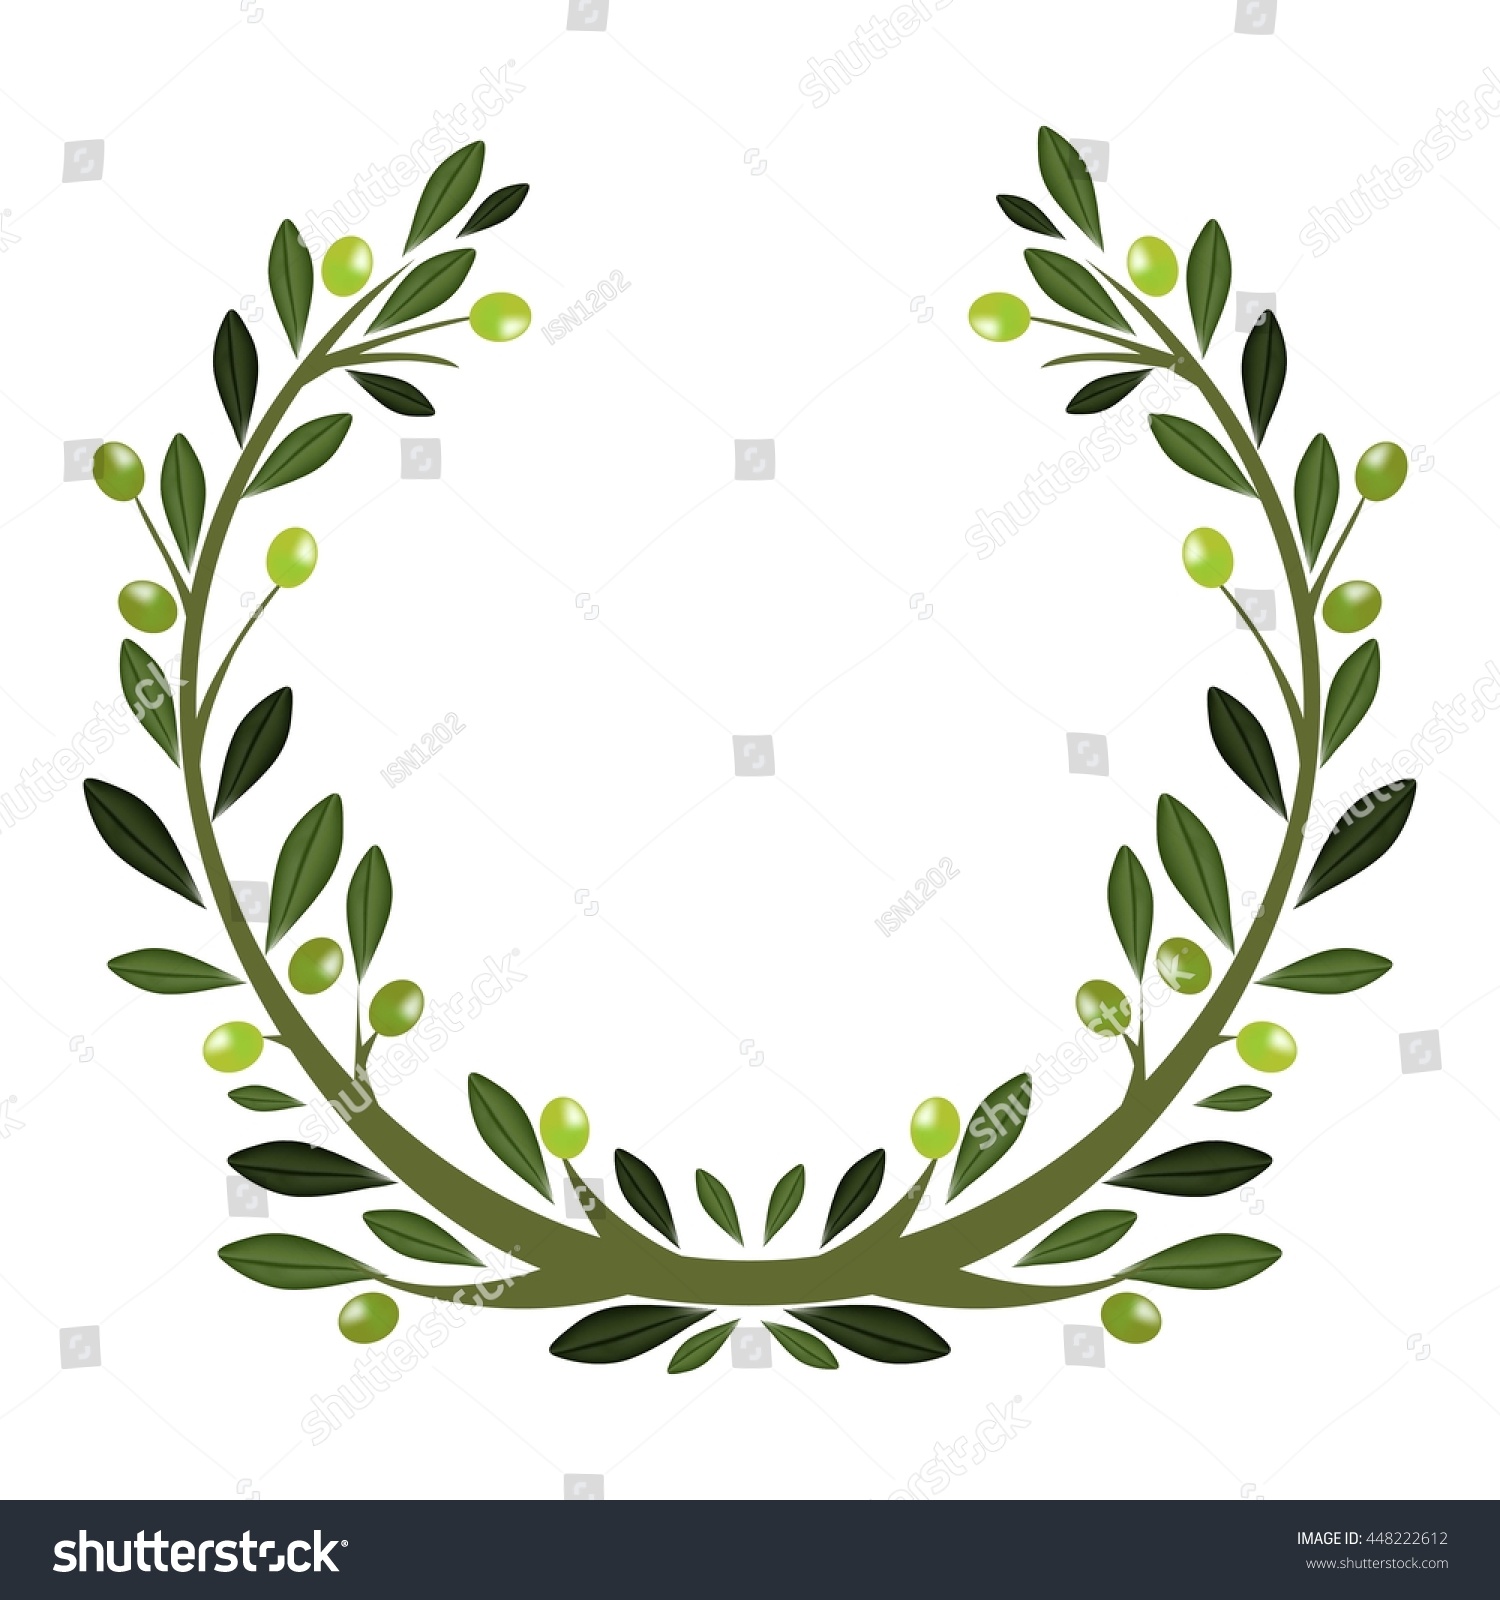 Green Olive Wreath Stock Vector Royalty Free Shutterstock